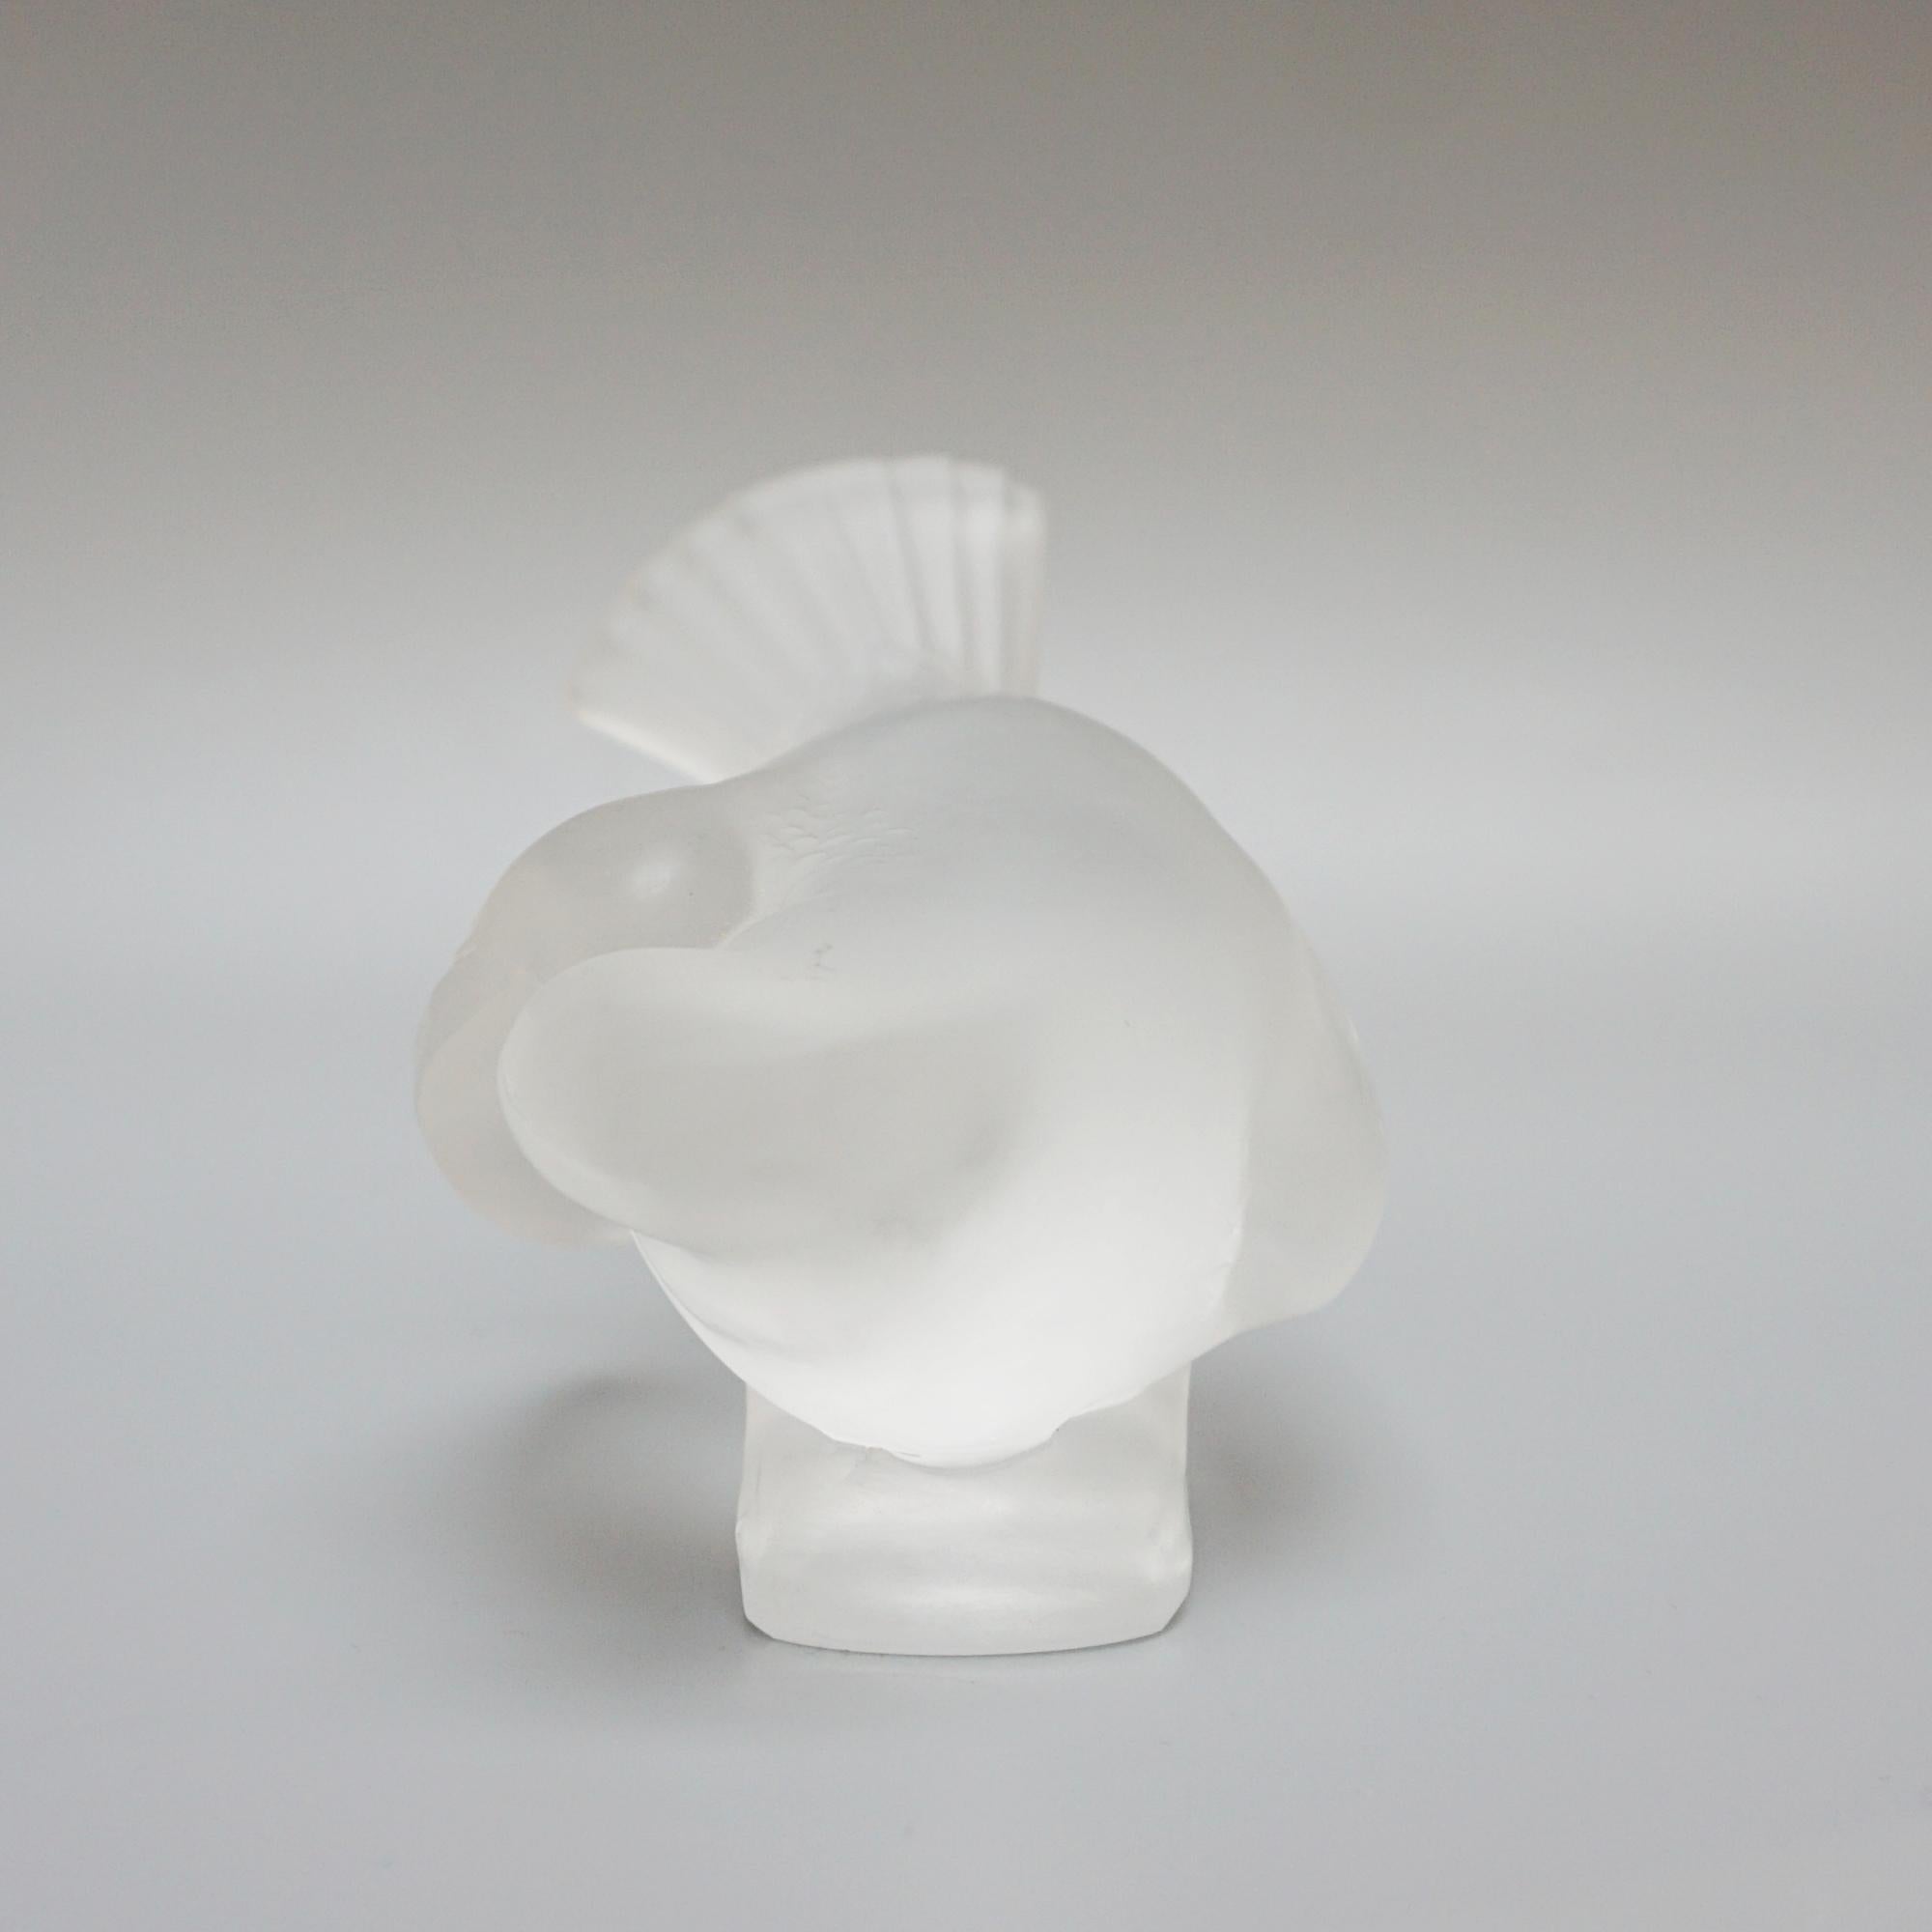 'Moineau Coquet' A Glass Bird Paperweight by Marc Lalique (1900 - 1977) For Sale 2